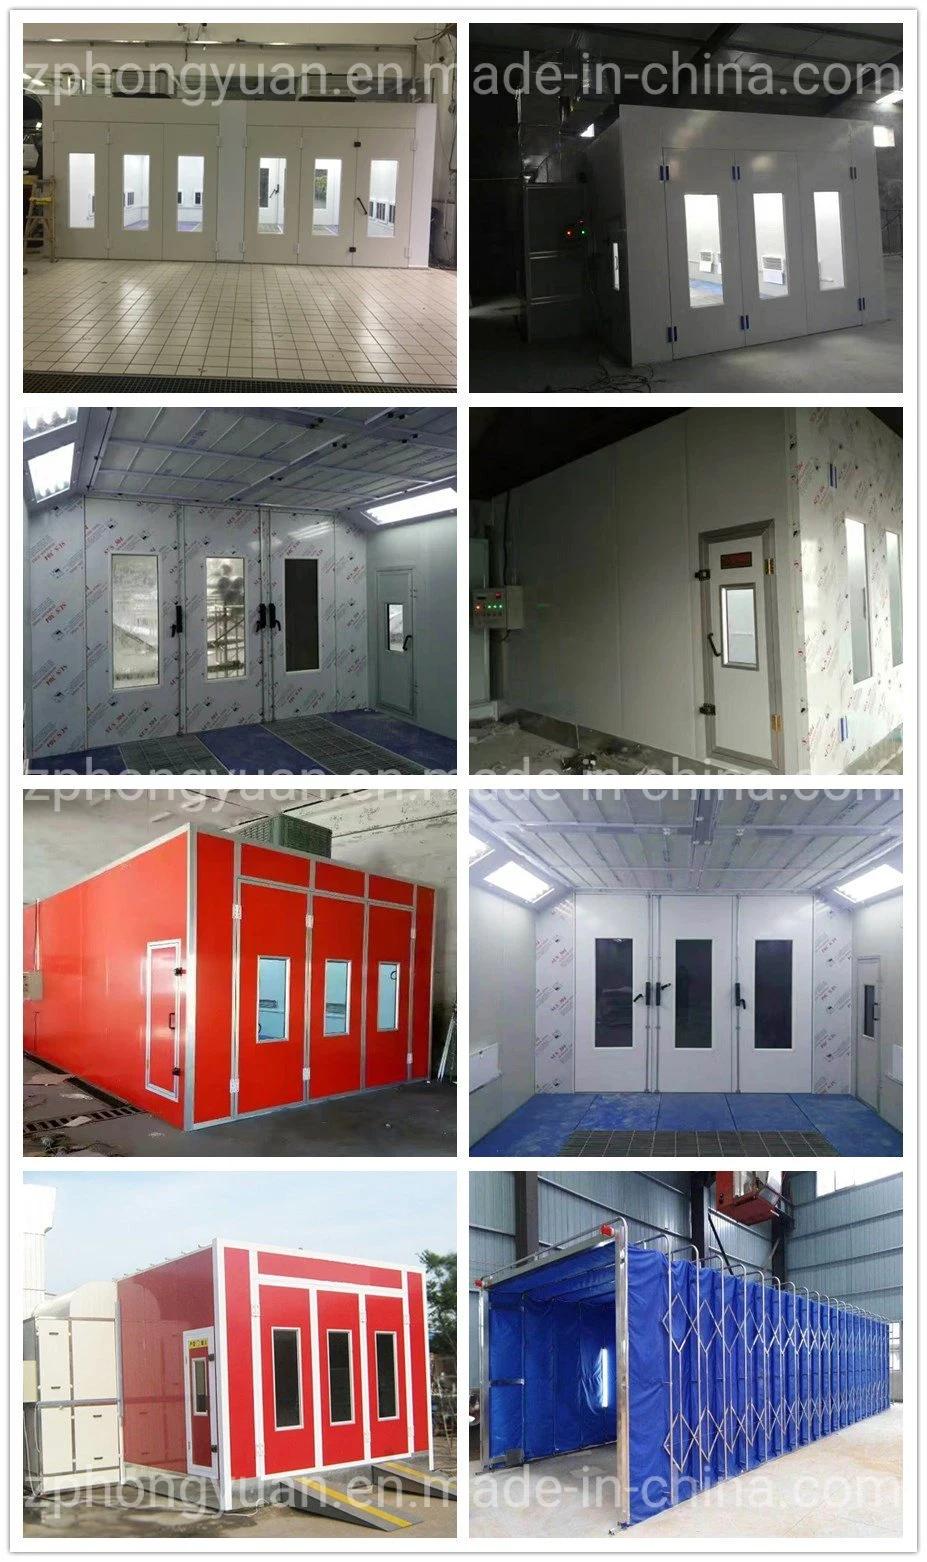 New Brand High Quality Spray Booth for Painting Cars